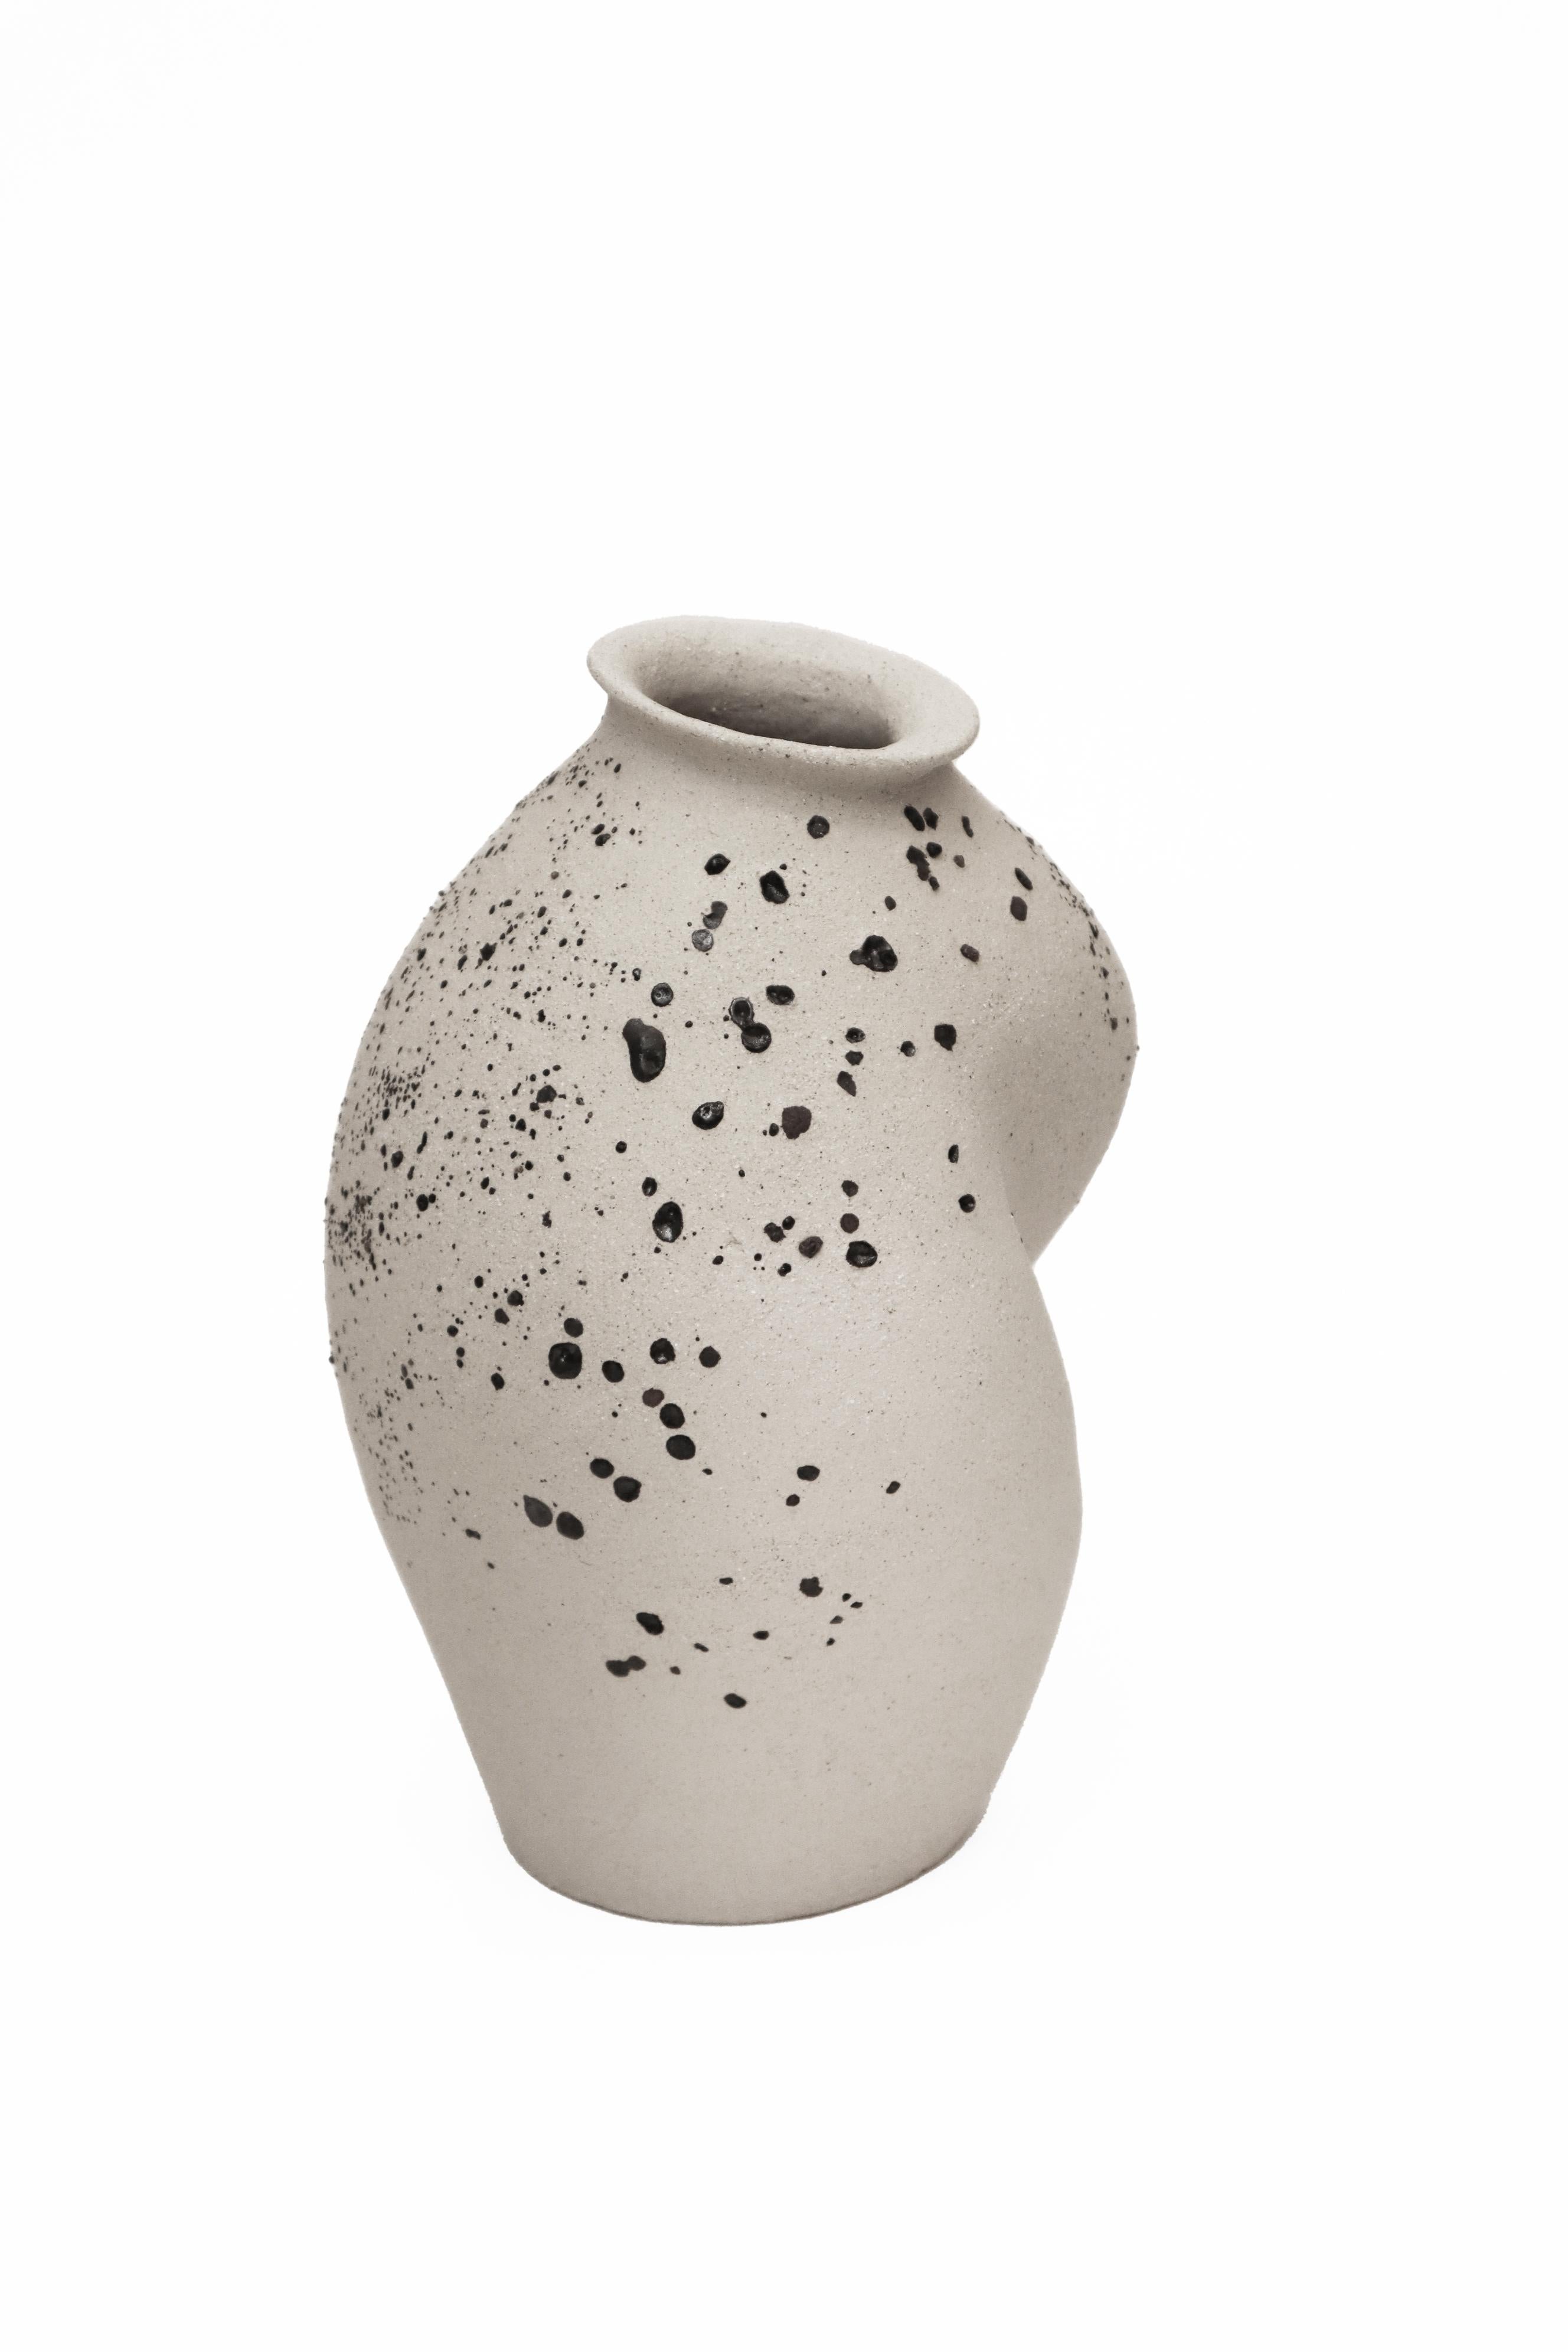 Stomata 4 vase by Anna Karountzou
Dimensions: W 12.5 x D 13 x H 23 cm
Materials: white stoneware clay, clear glaze inside, decorated outside with volcano rocks collected from Santorini, fired at 1240

Born and based in Athens, Greece, with a